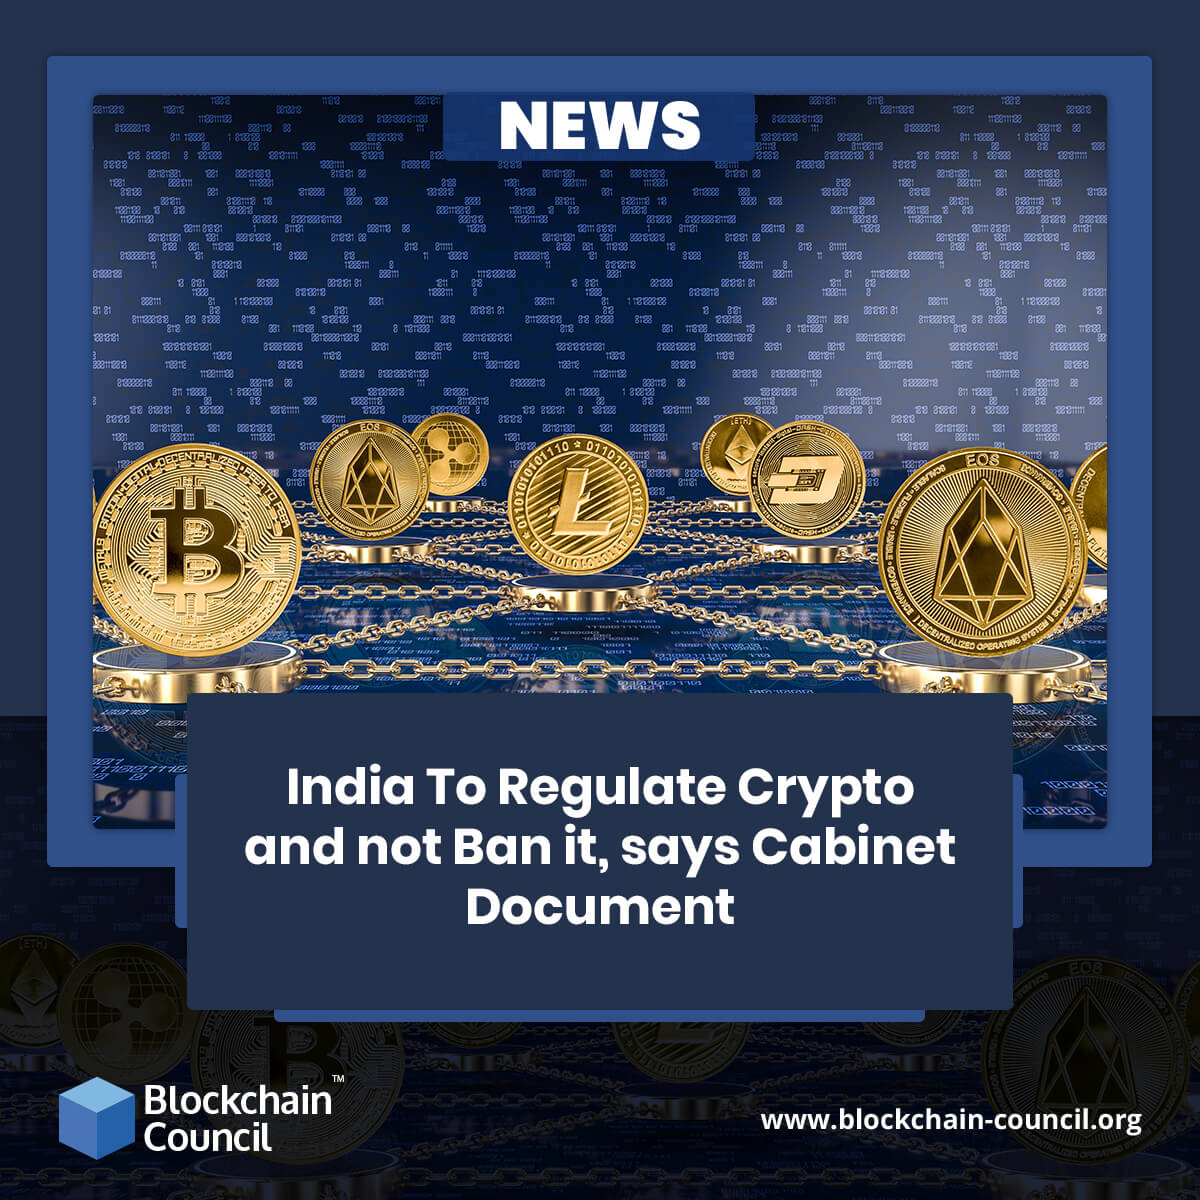 India To Regulate Crypto and not Ban it, says Cabinet Document